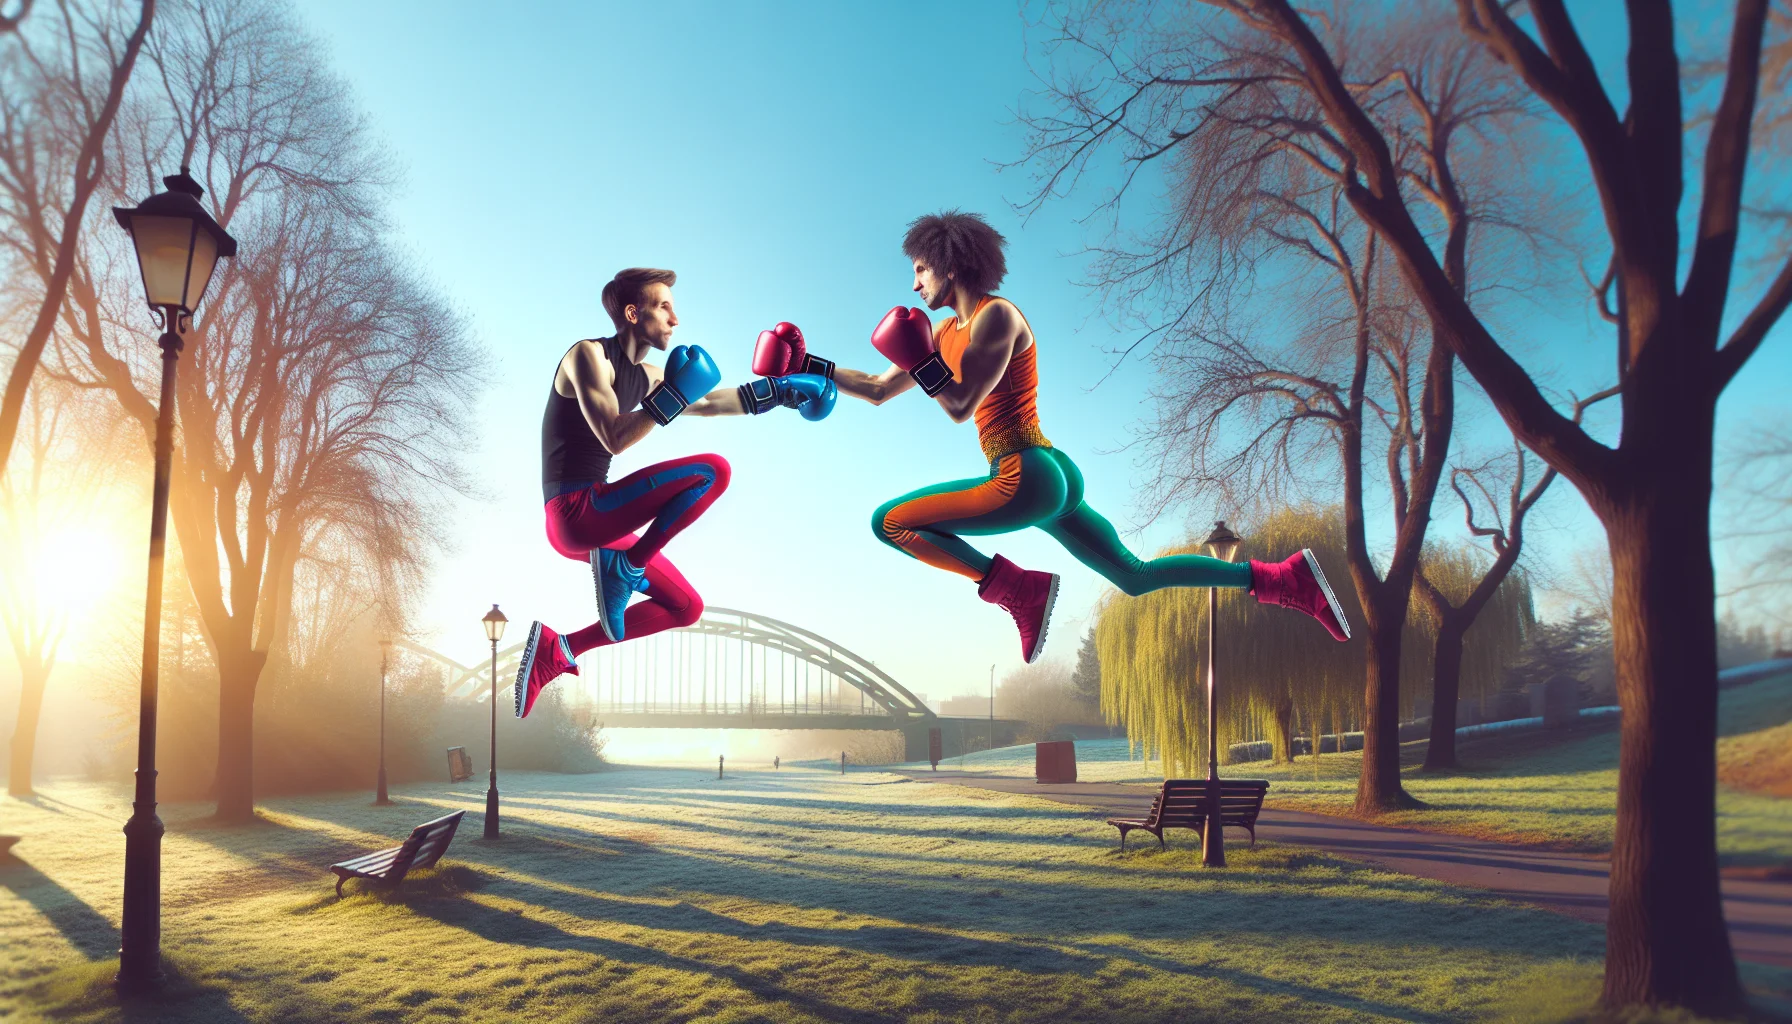 Design a playful image to stimulate laughter and interest in fitness. Picture a Caucasian male and a Black female in mid-air, performing fly kickboxing. They should be viewing each other with competitive and cheerfulness, both wearing vibrant color workout clothes. The setting is an open-air park surrounded by trees. It should appear like gravity has taken a break, both of them are suspended mid-air, their kickboxing gloves meeting in a friendly 'high-five'. Play around with exaggerated effects like action lines to capture the dynamics of the situation. This is all set against the backdrop of a crisp, blue morning sky.